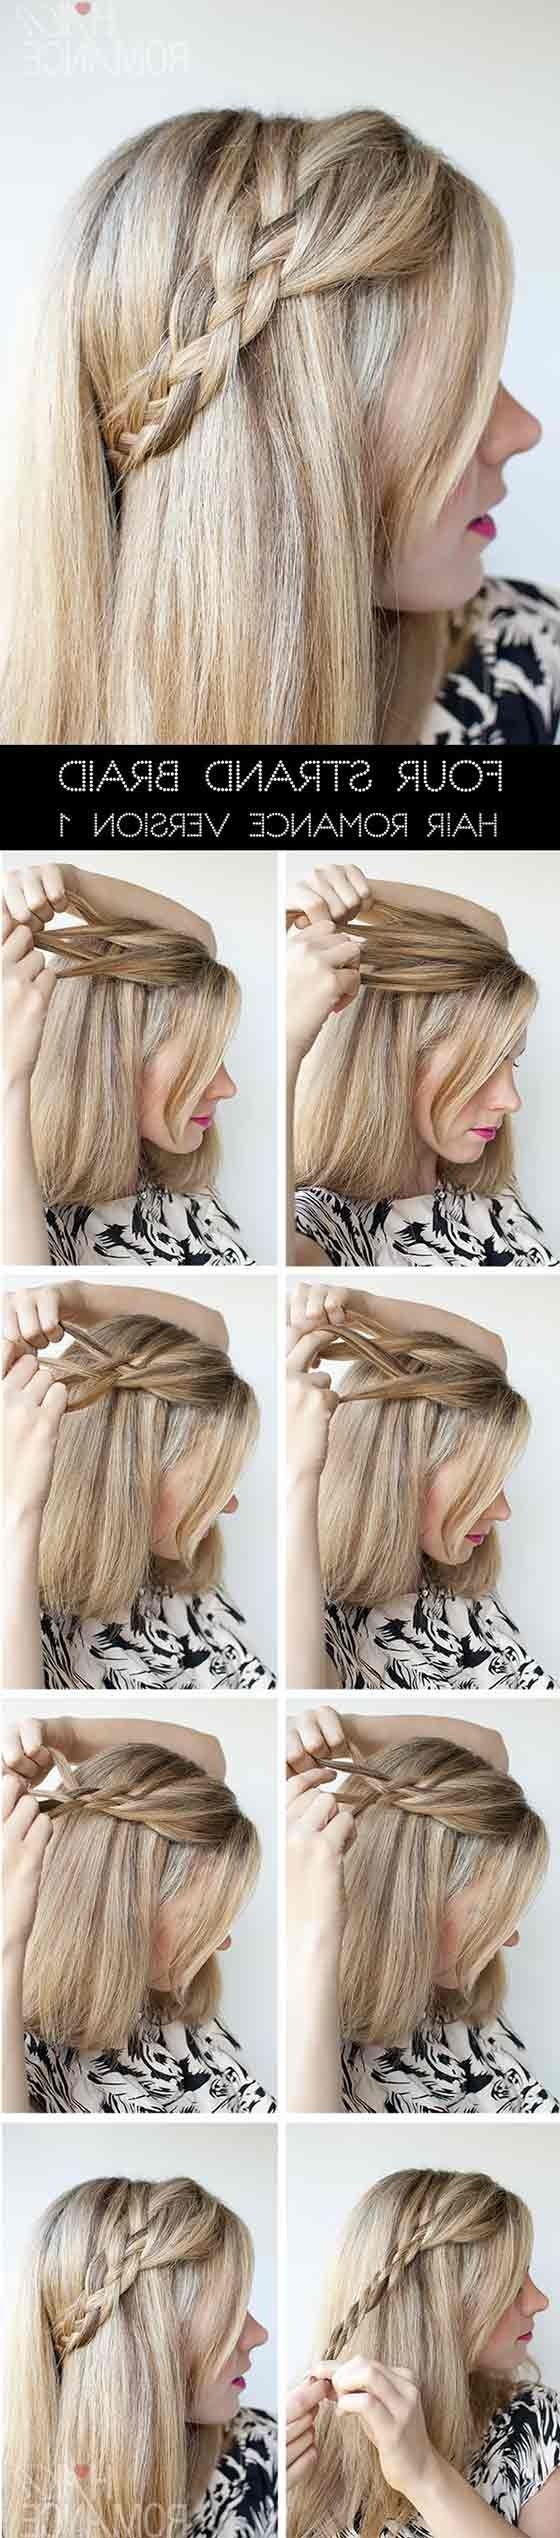 40 Braided Hairstyles For Long Hair Within Widely Used Pony Hairstyles With Accent Braids (View 12 of 20)